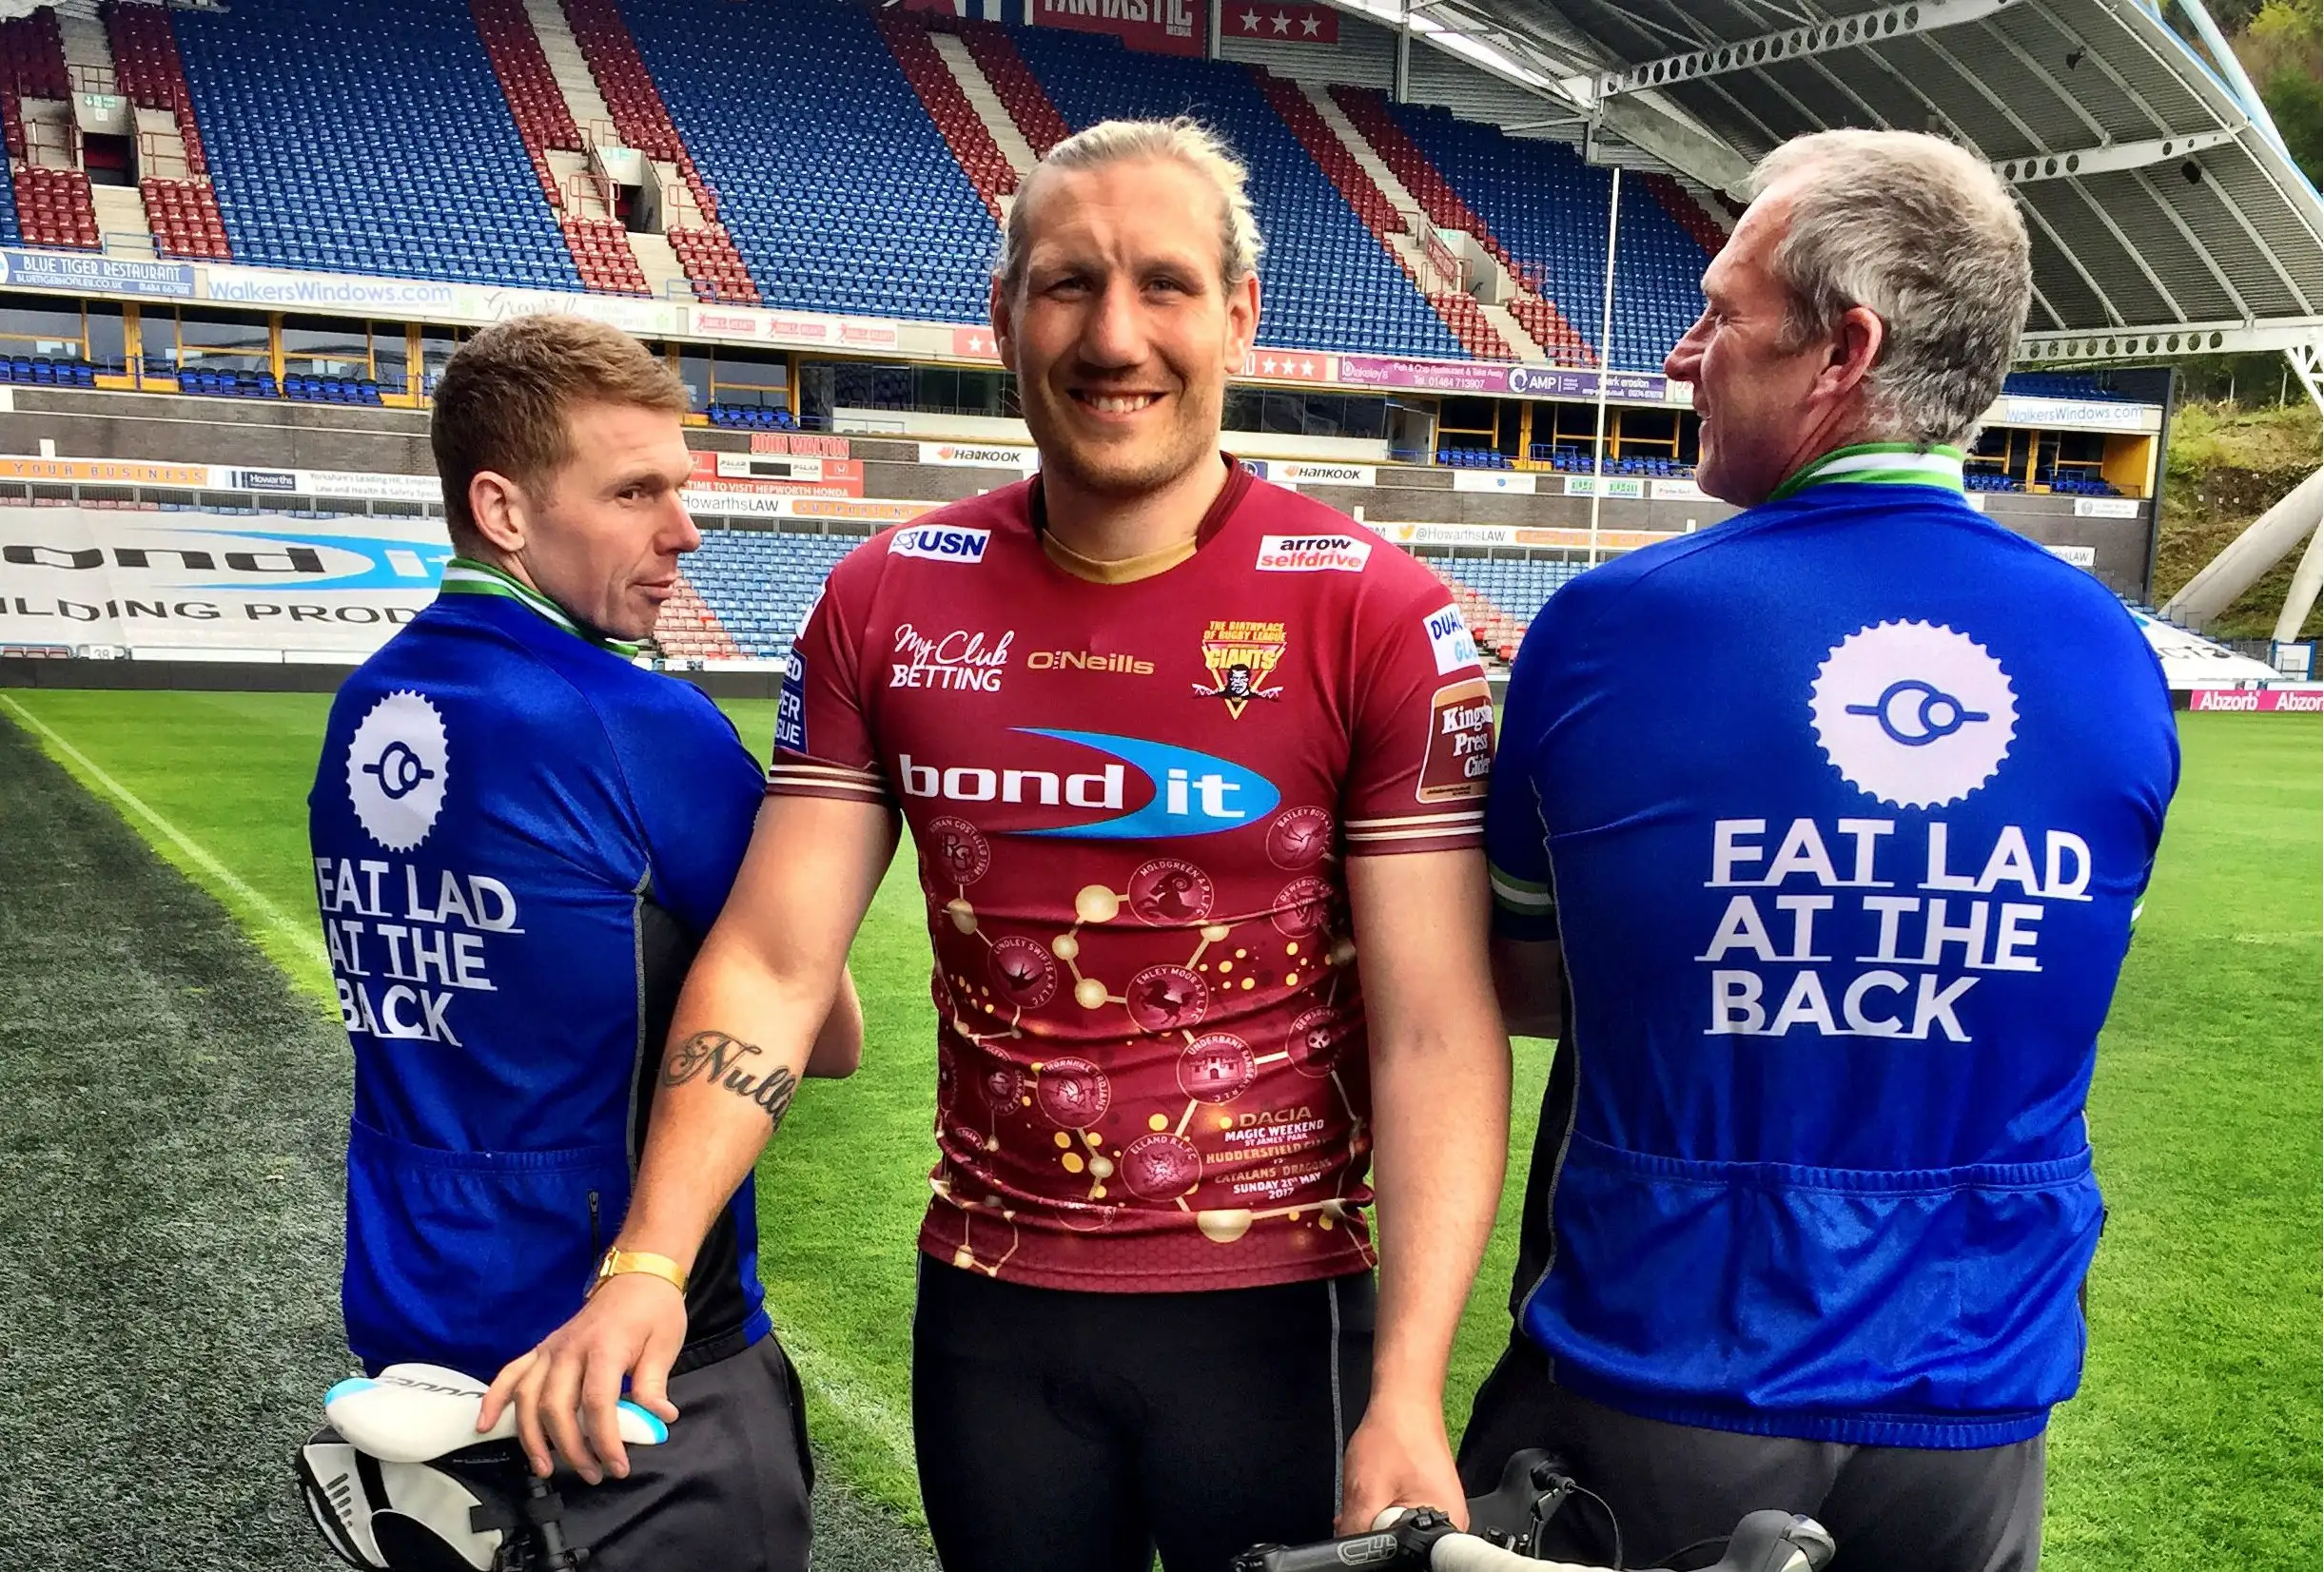 Fat Lad At The Back team up with Giants fundraisers